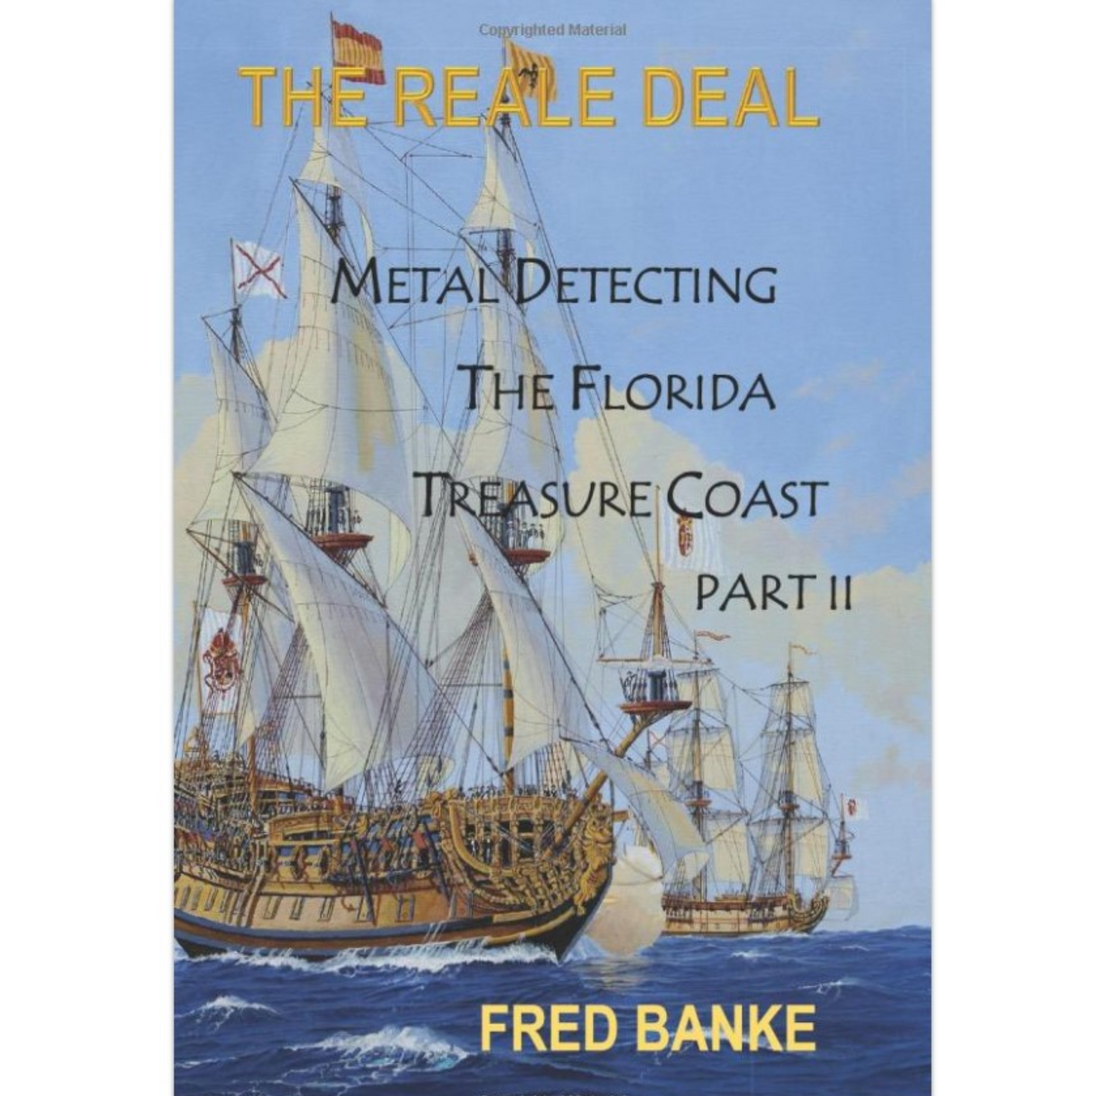 Fred Banke book on Treasures Part 2